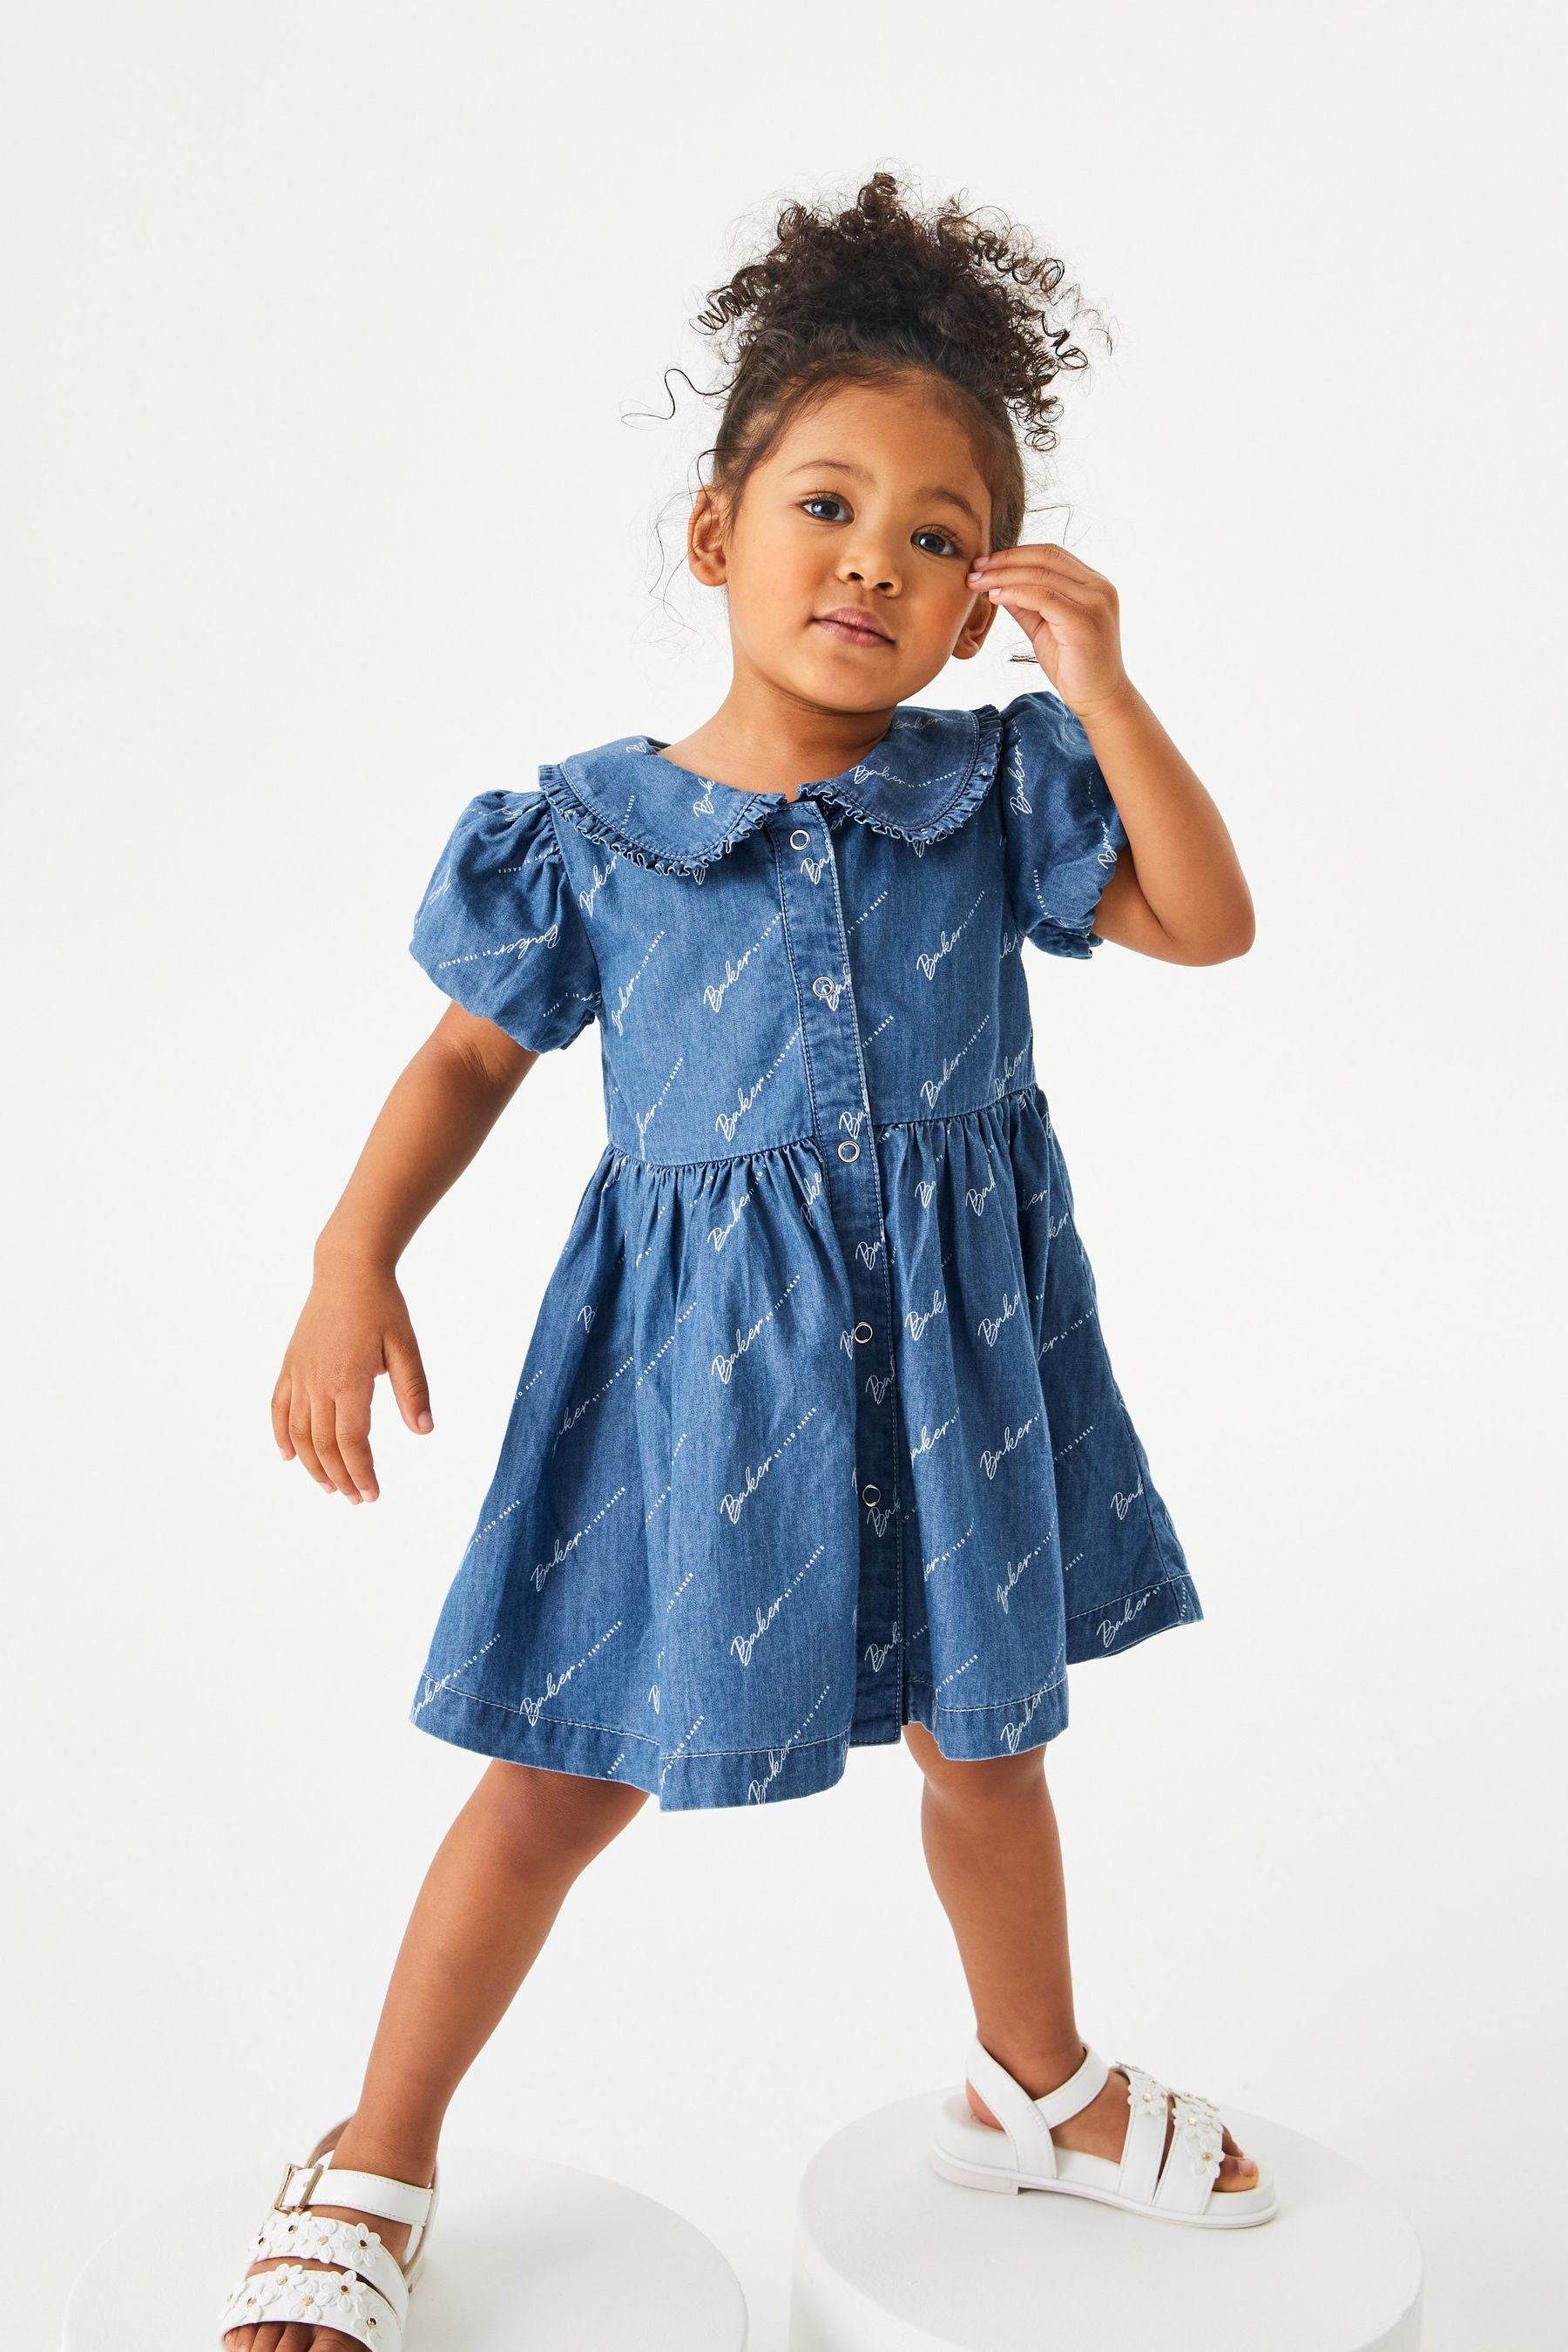 Baker by Ted Baker Chambray Dress